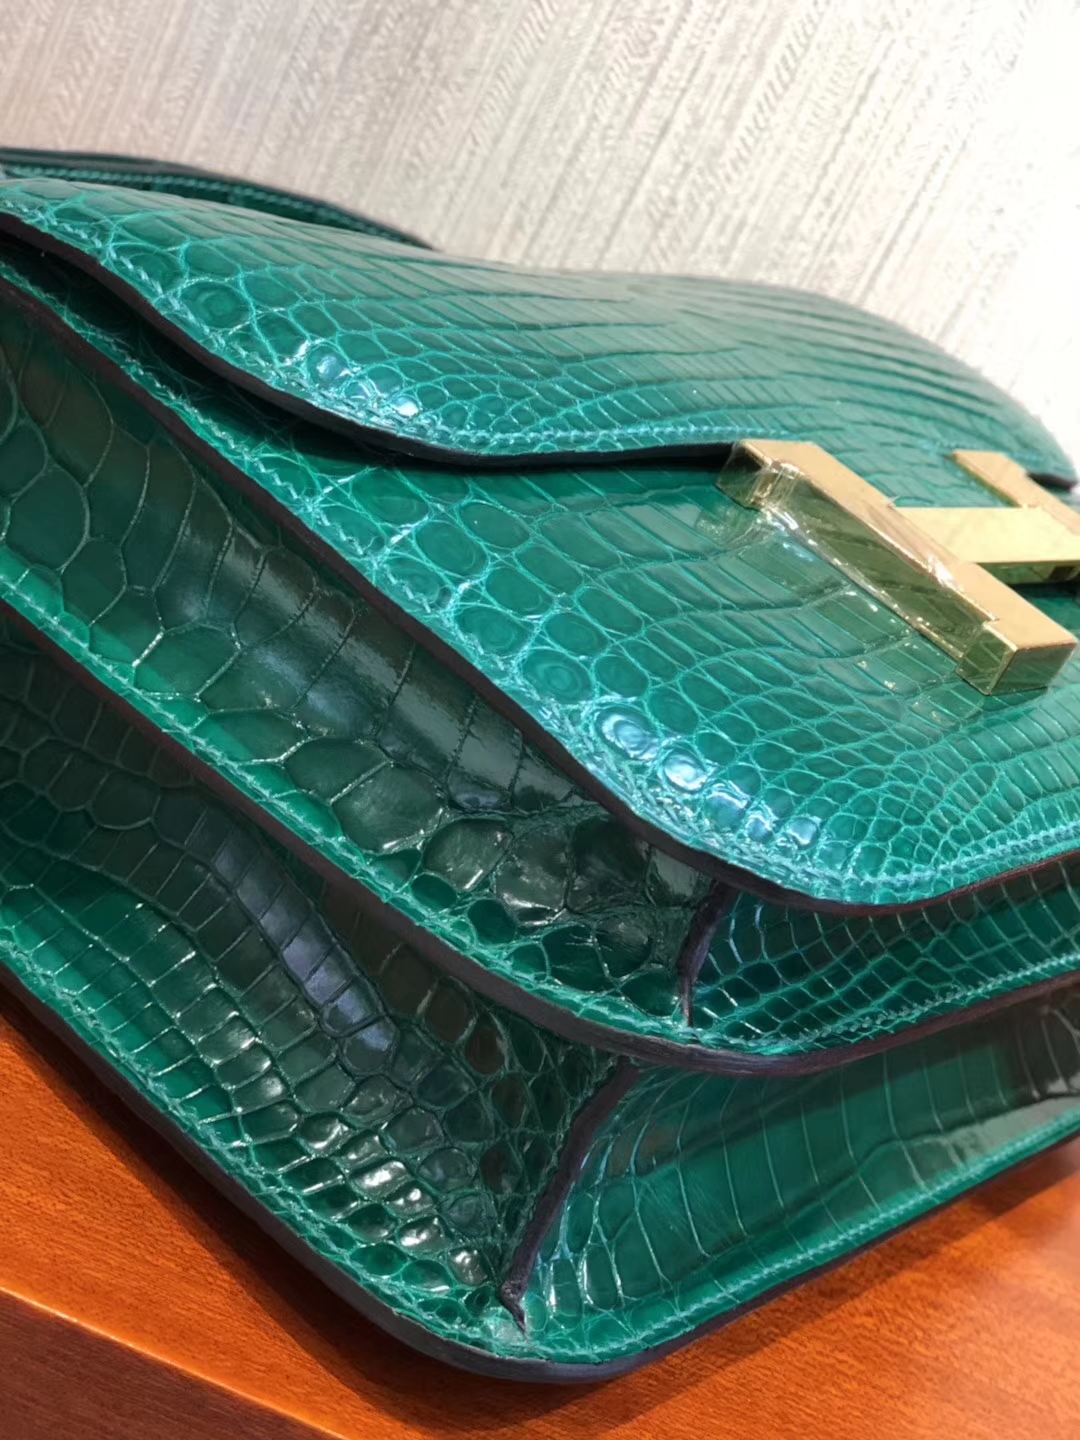 Noble Hermes 6Q Emerald Green Shiny Crocodile Leather Constance Bag Gold Hardware